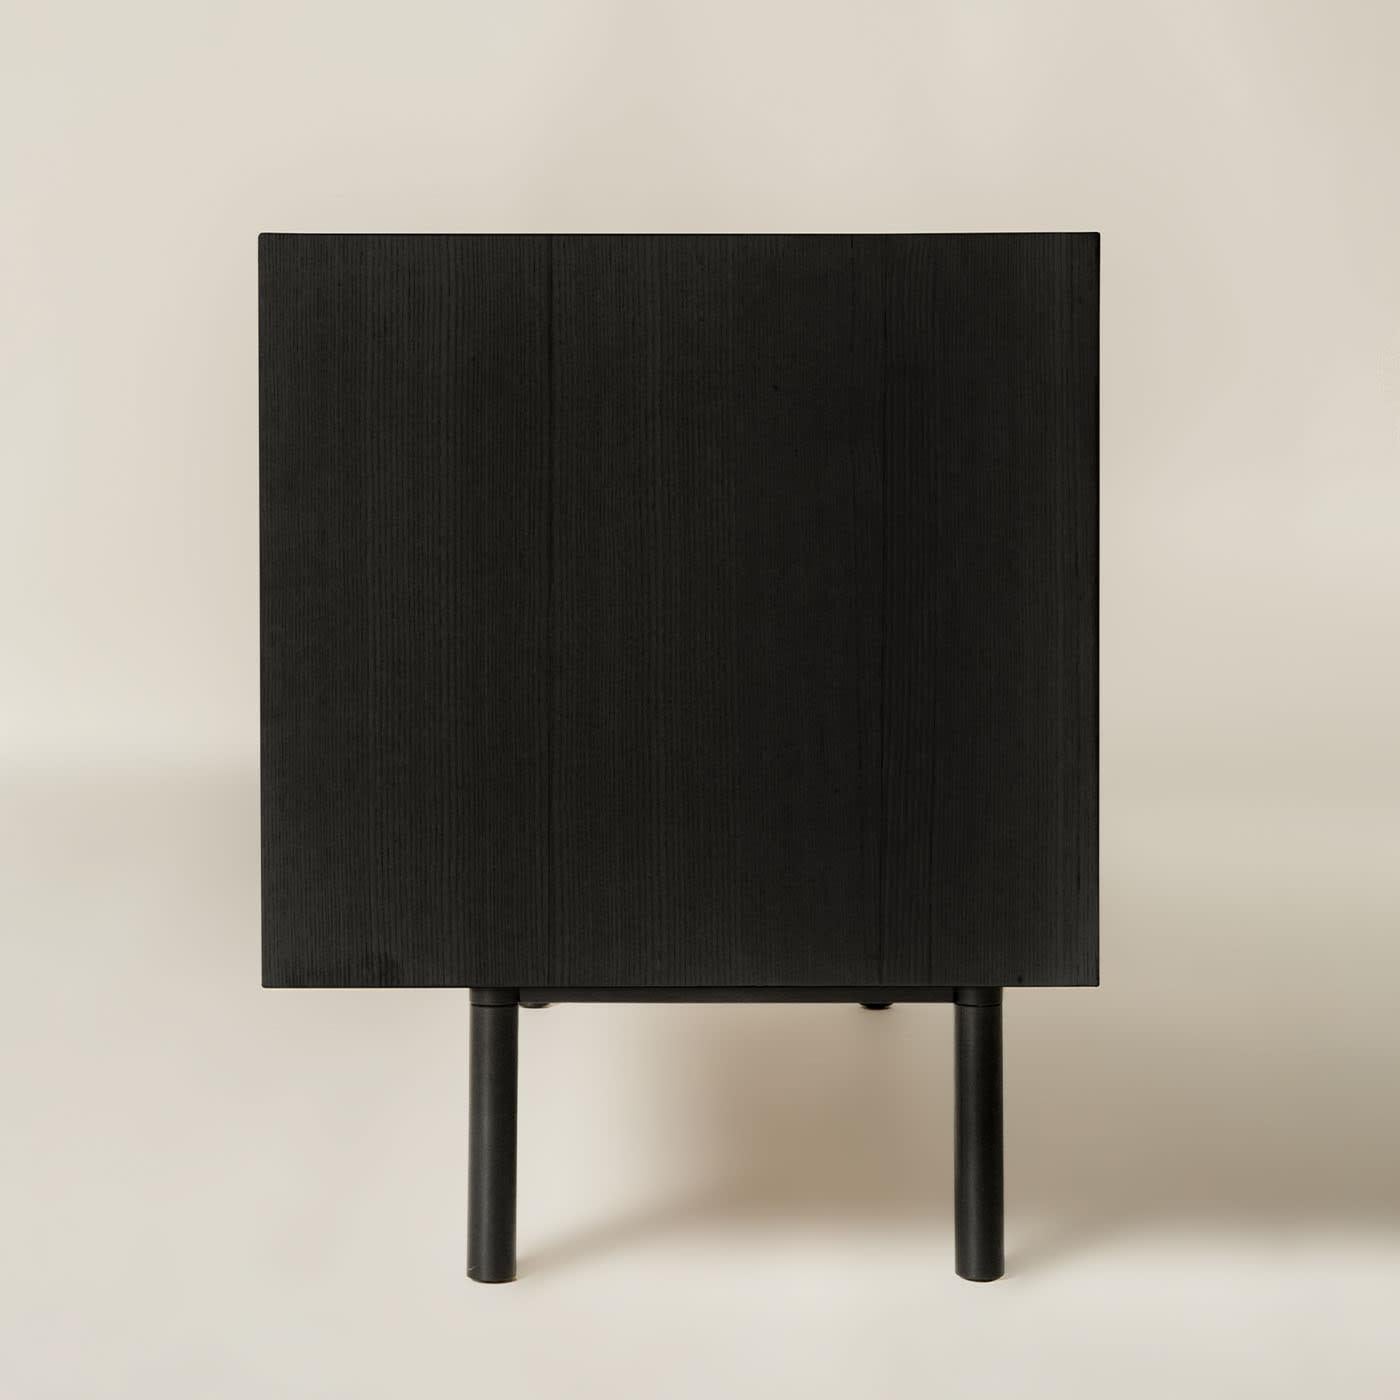 The Sipario sideboard creates a frame where the staggered layers and their vertical pattern produce a fascinating rhythm of shadows. As a result, the essence of solid ash wood reveals different details. The top is a deliberate invitation to give